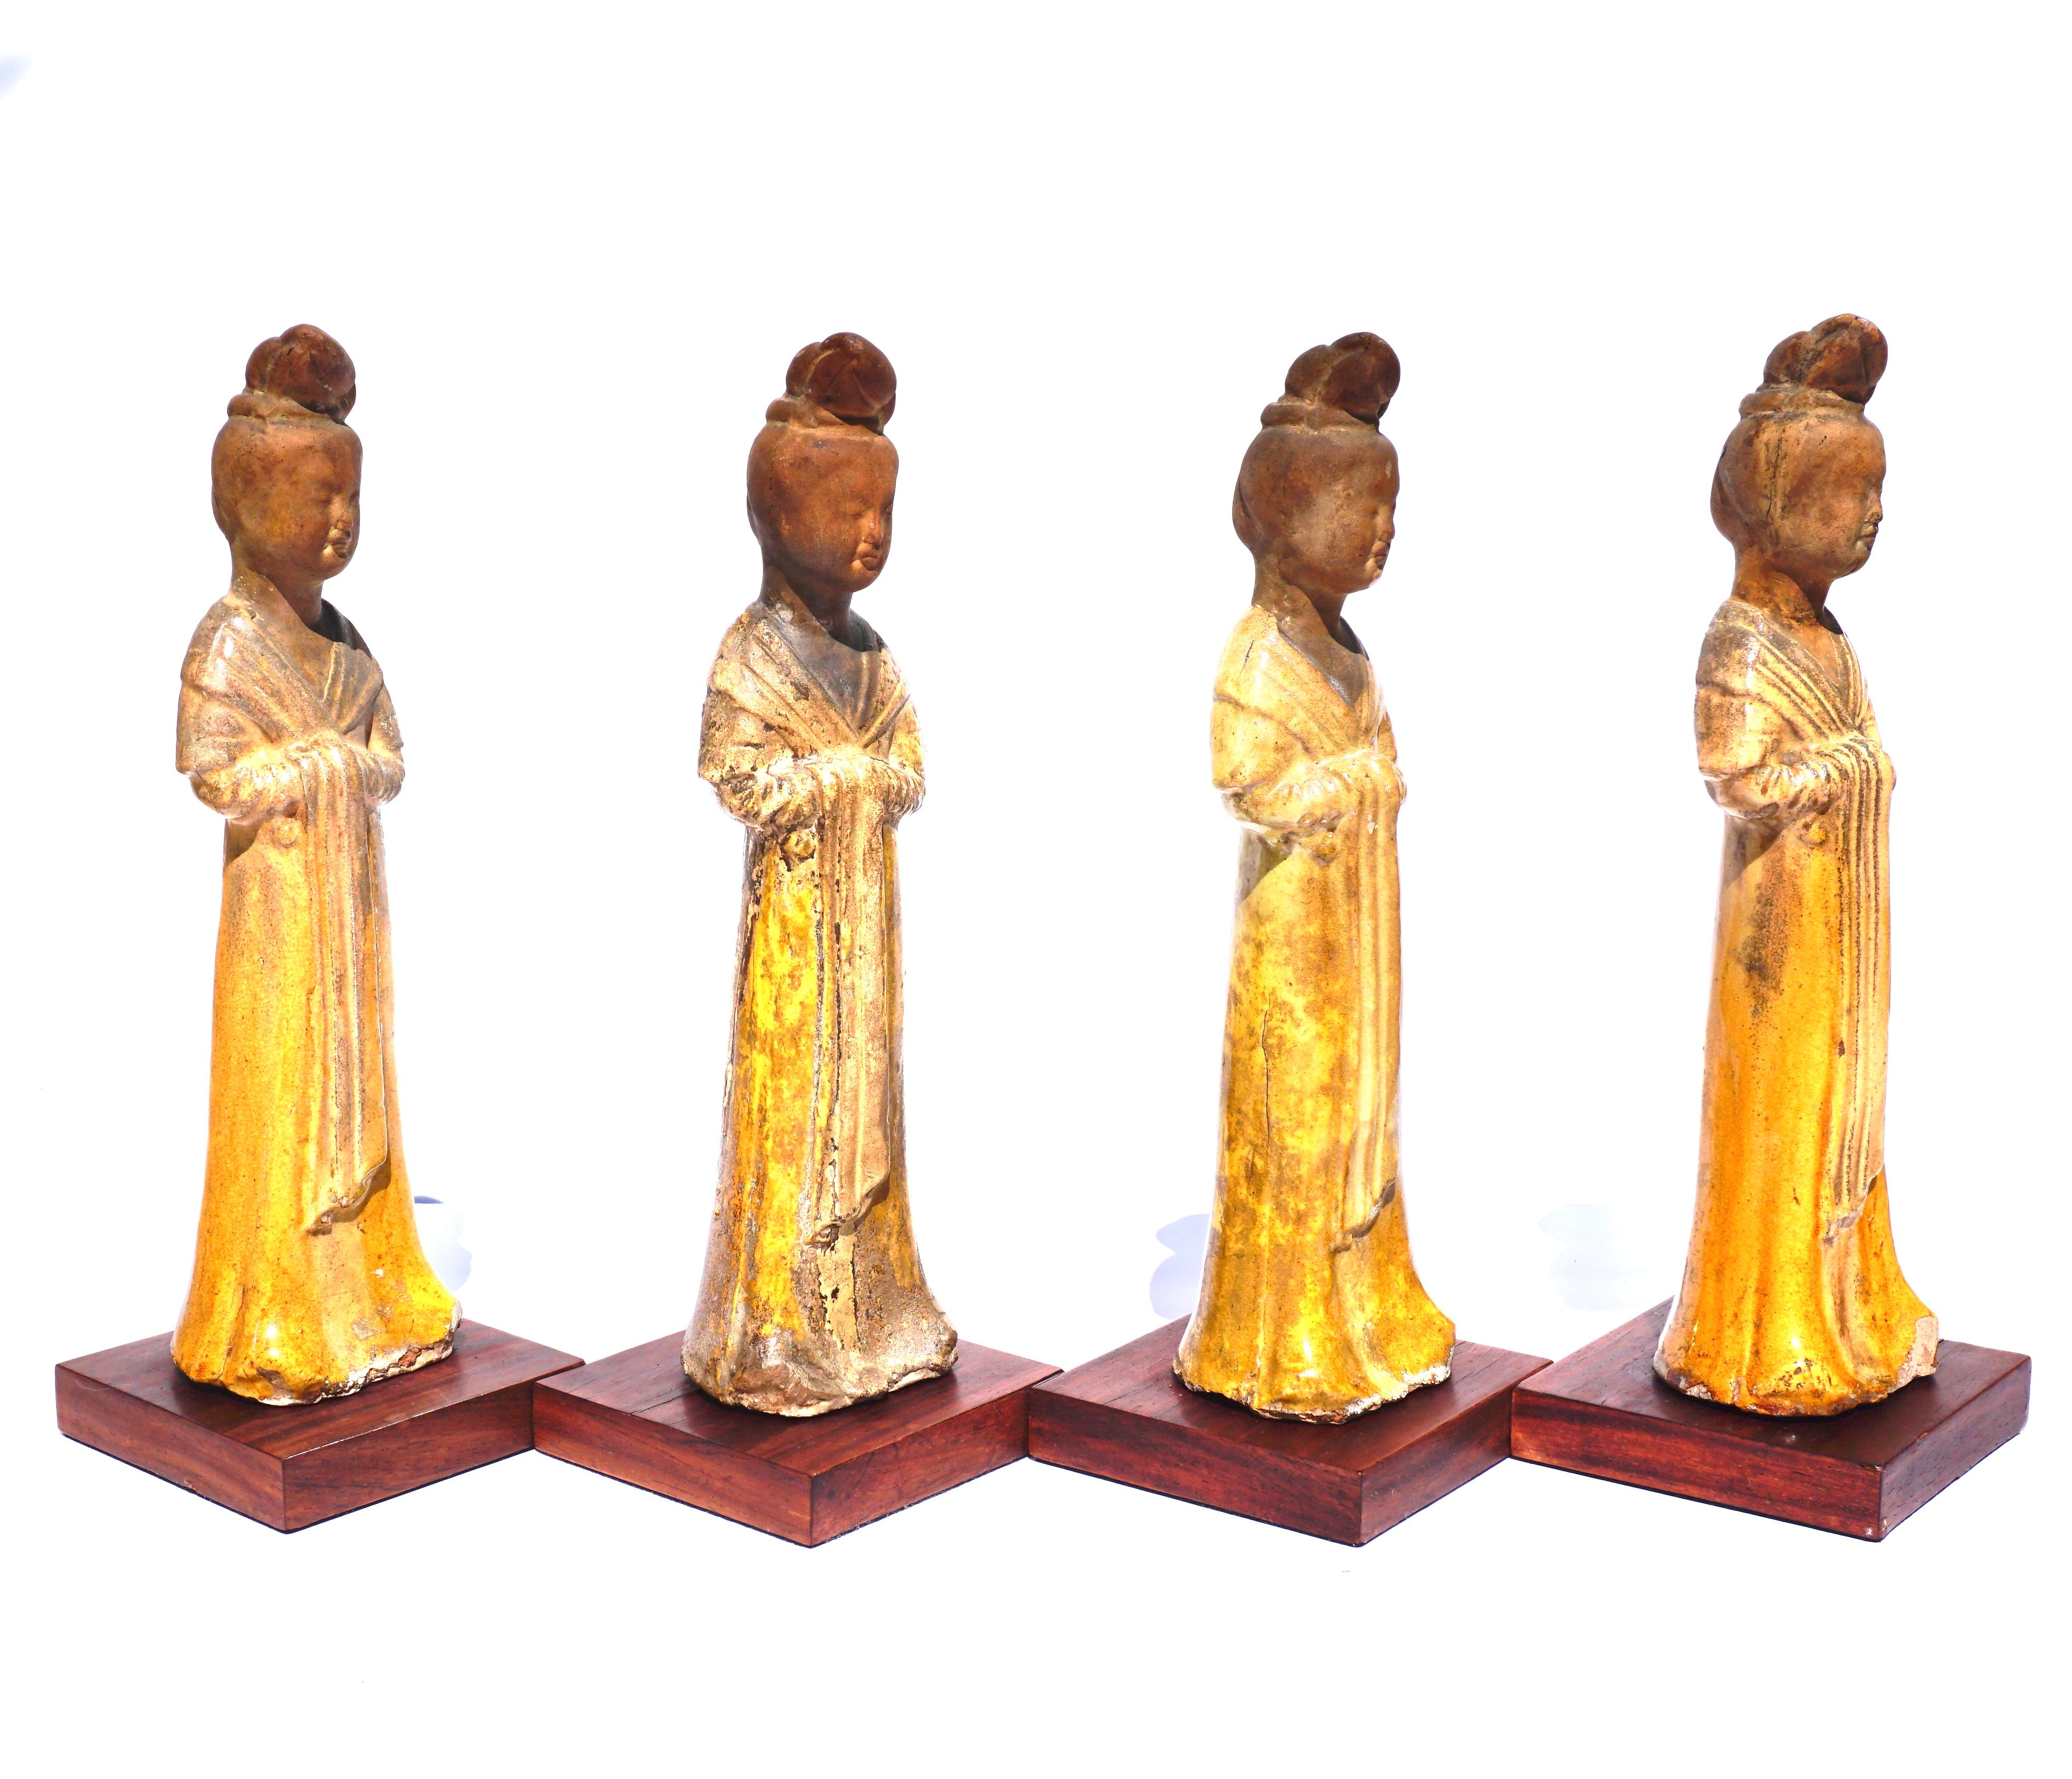 A set or four (4) glazed pottery courtesan tomb attendants from the Tang Dynasty. It is usually a treat when you find a pair of these Minqui figures but when you have four; the display is even more formidable. These requisites for the after life